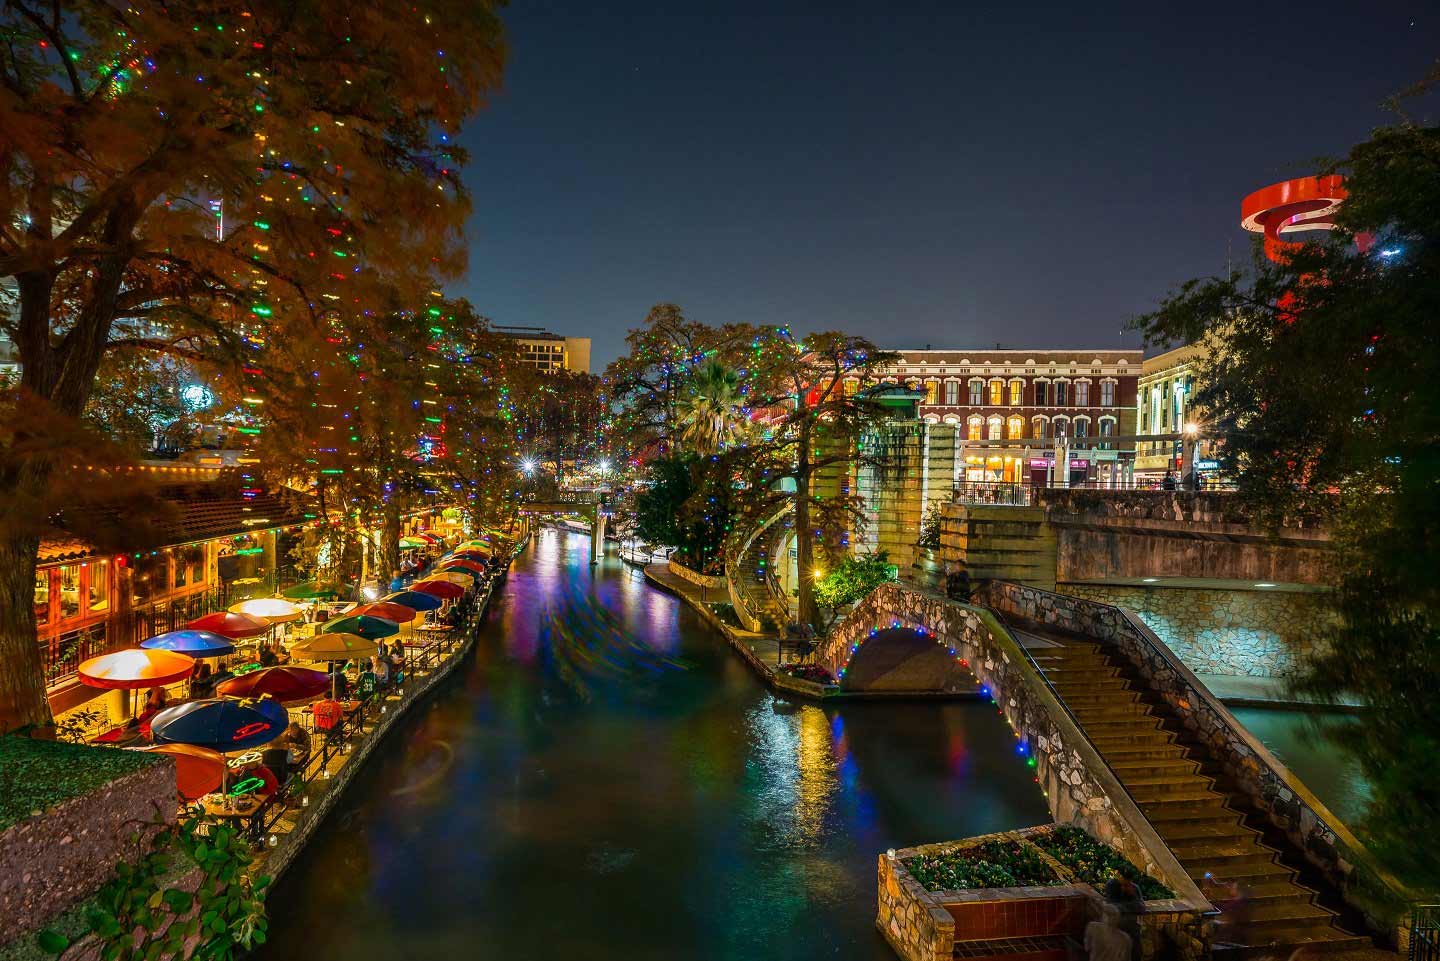 Travel site claims River walk is in the top list of most beautiful